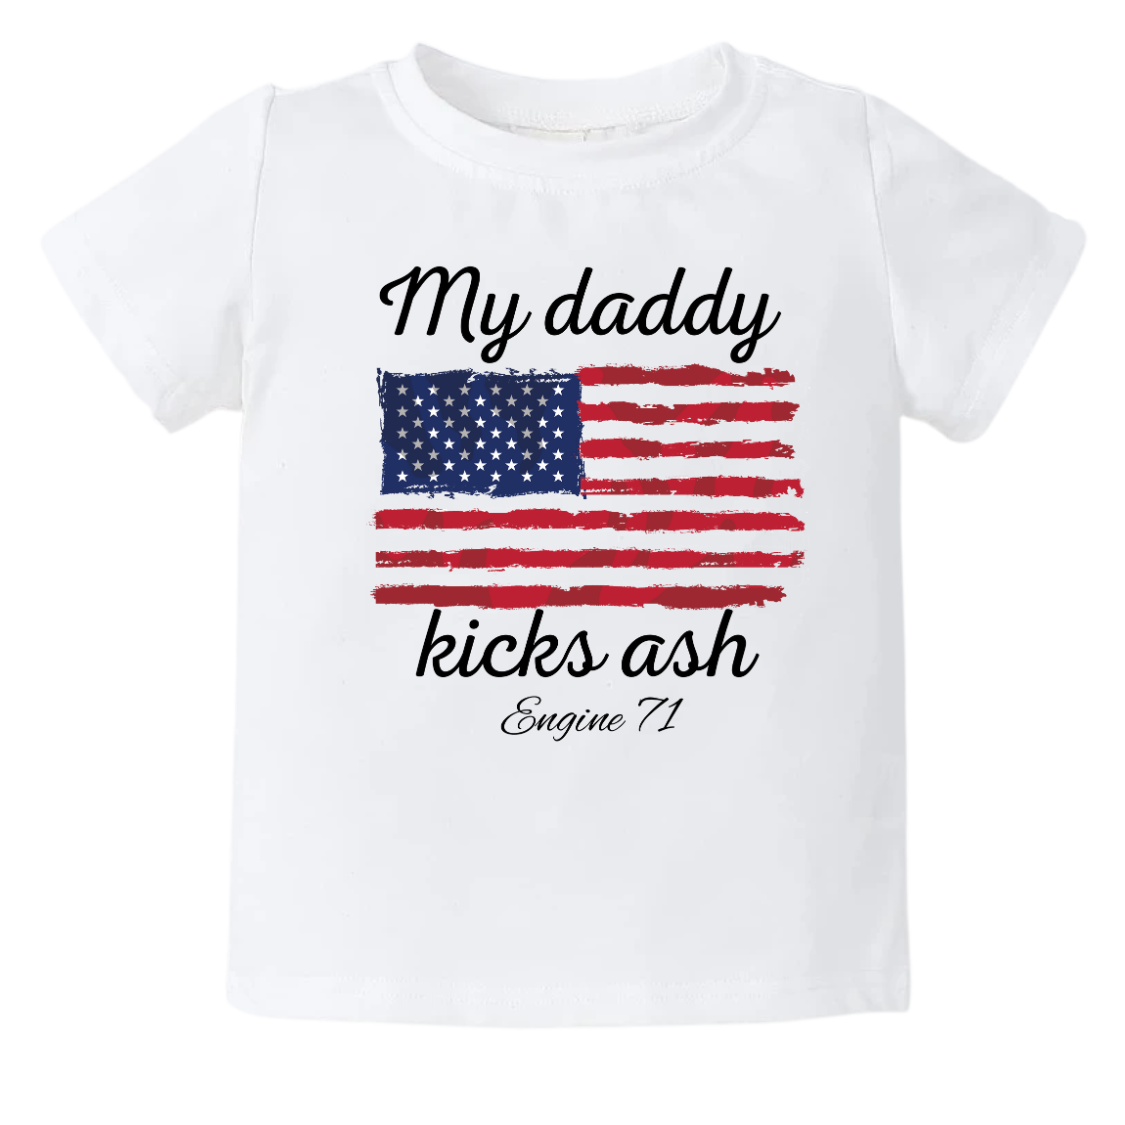 Kid's t-shirt with a cute printed design of American flag theme, customizable with the text 'My Daddy Kicks Assh'.